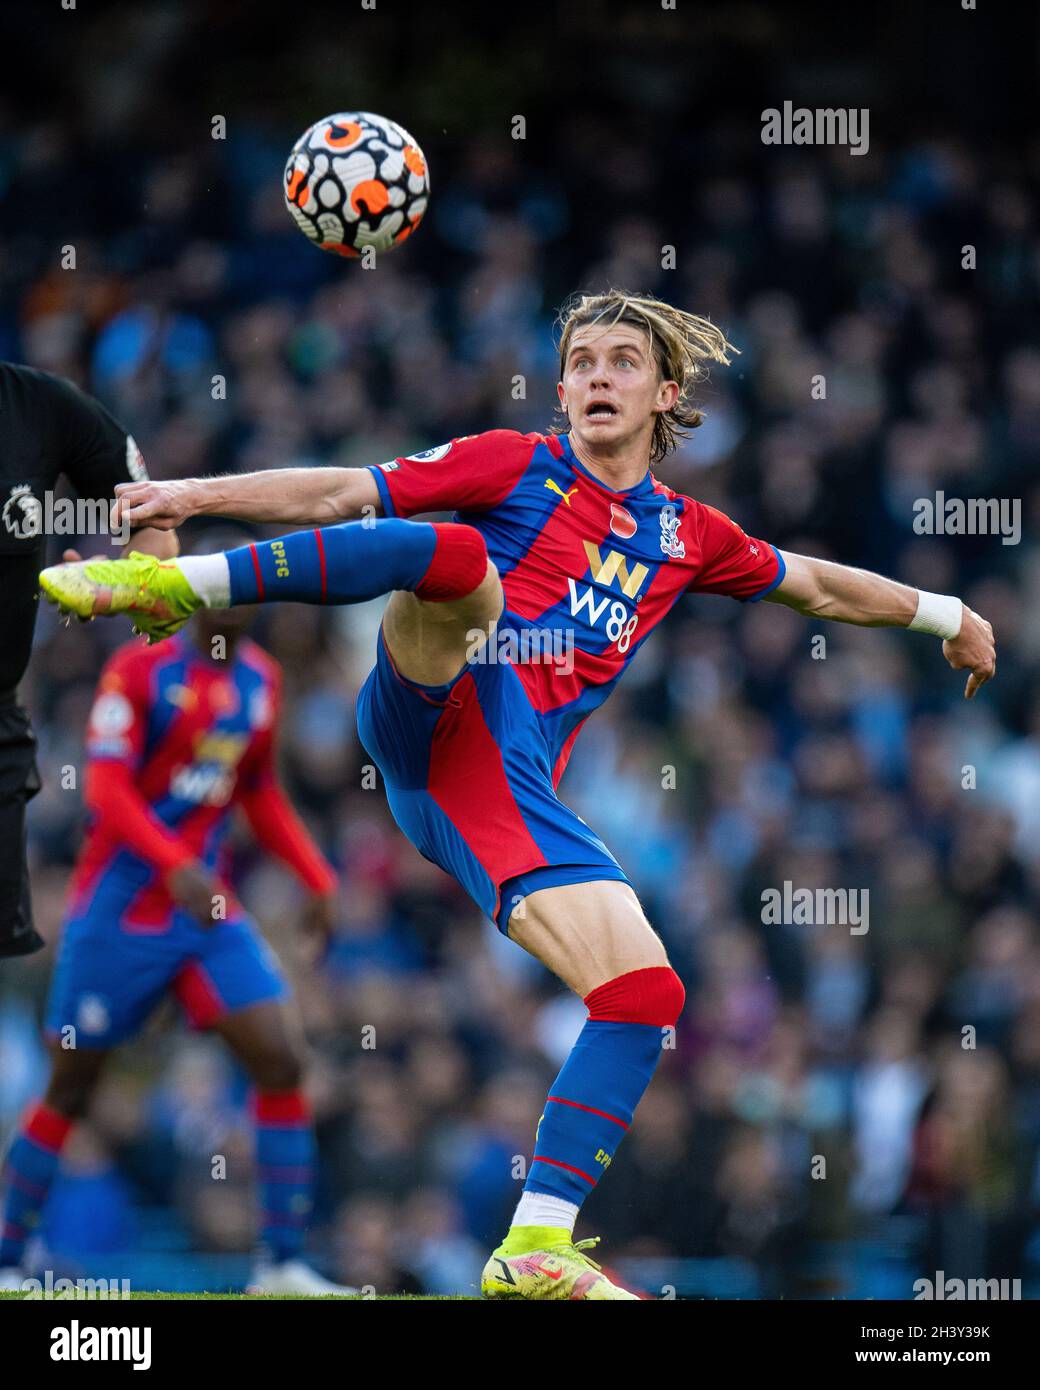 Crystal palace gallagher Gallagher underwhelms